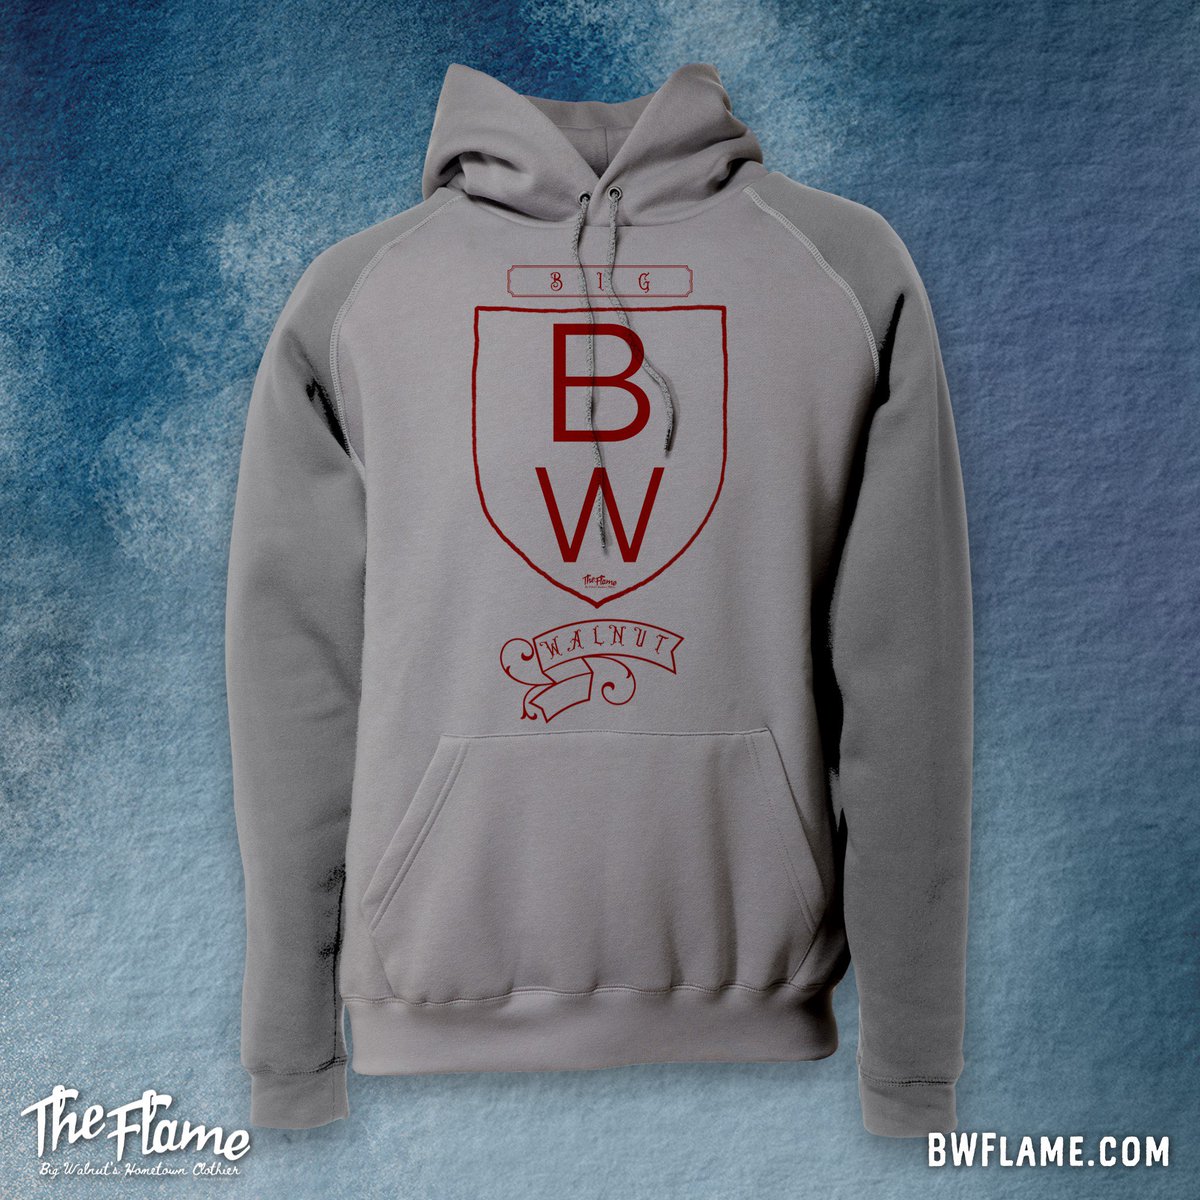 🛍 Your new favorite hoodie is waiting for you at BWFlame.com
#bigwalnut #inspireandguide #bwflame #goeagles #local #hoodie #comfy #design #retro #vintage #ohio